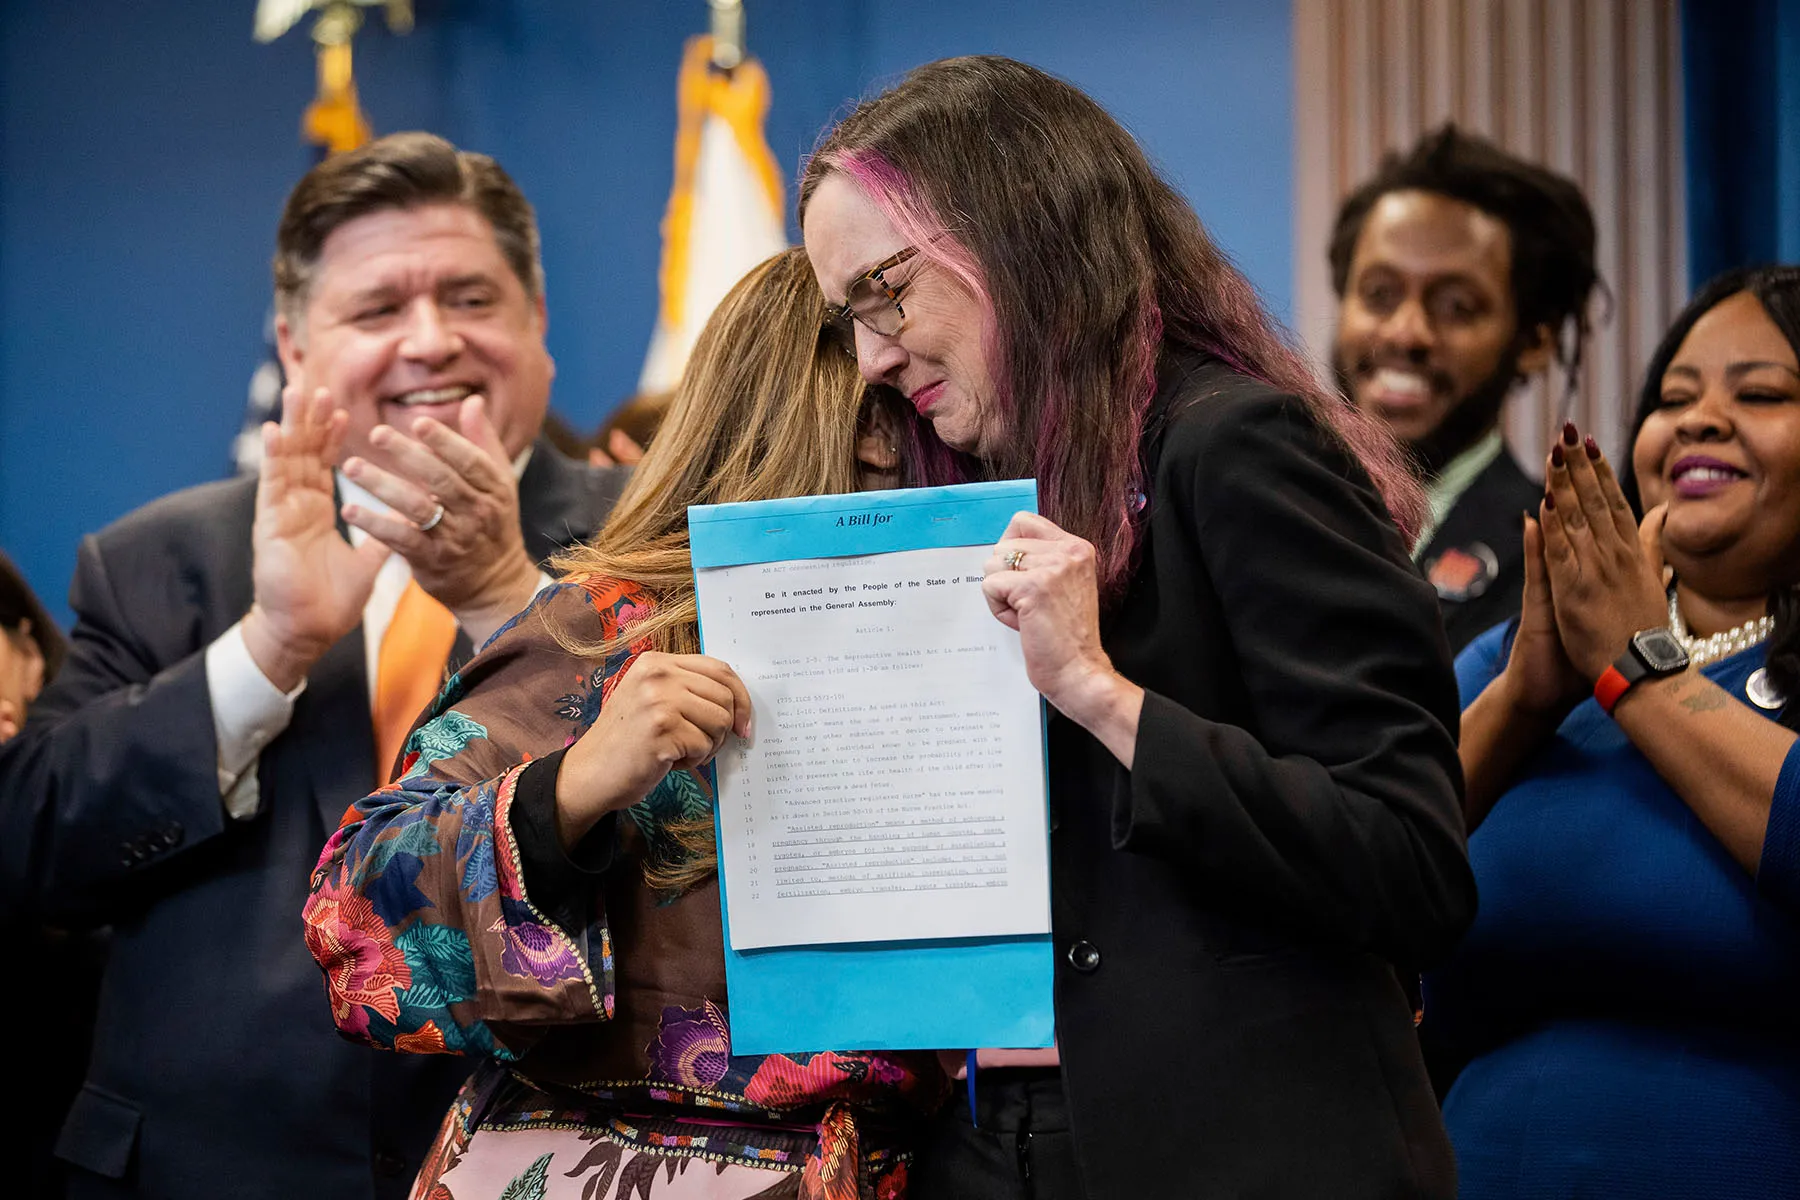 State Rep. Kelly Cassidy and state Sen. Celina Villanueva hug each other as they hold the signed House Bill 4664.